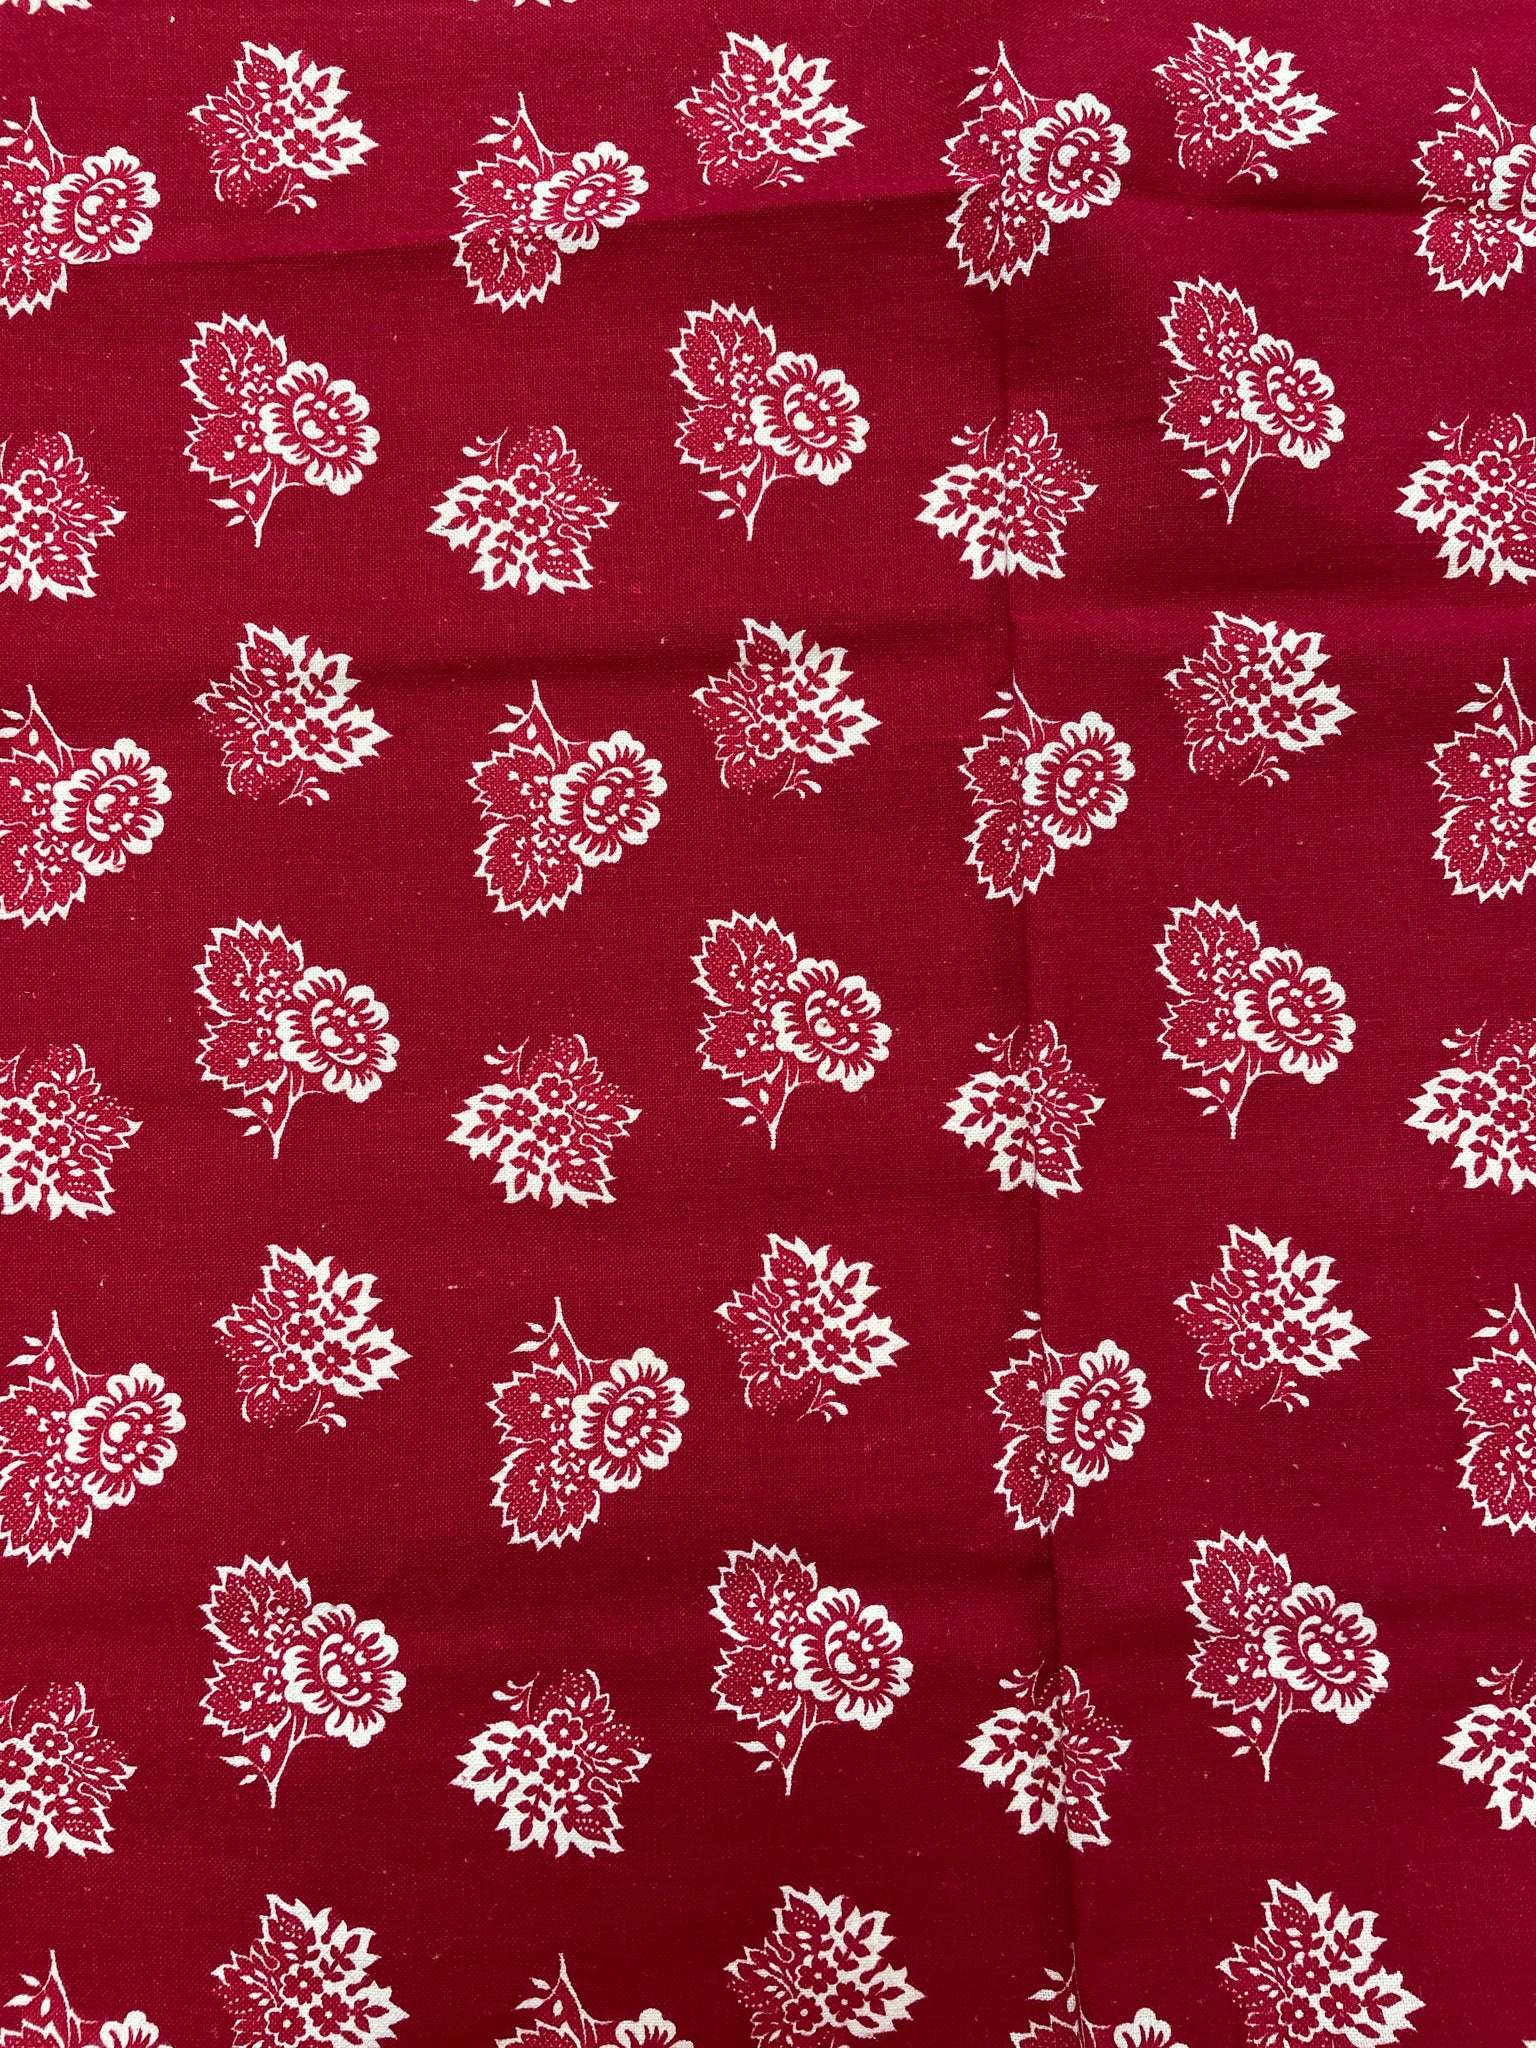 2 5/8 YD Cotton Kettle Cloth - Red with White Flowers